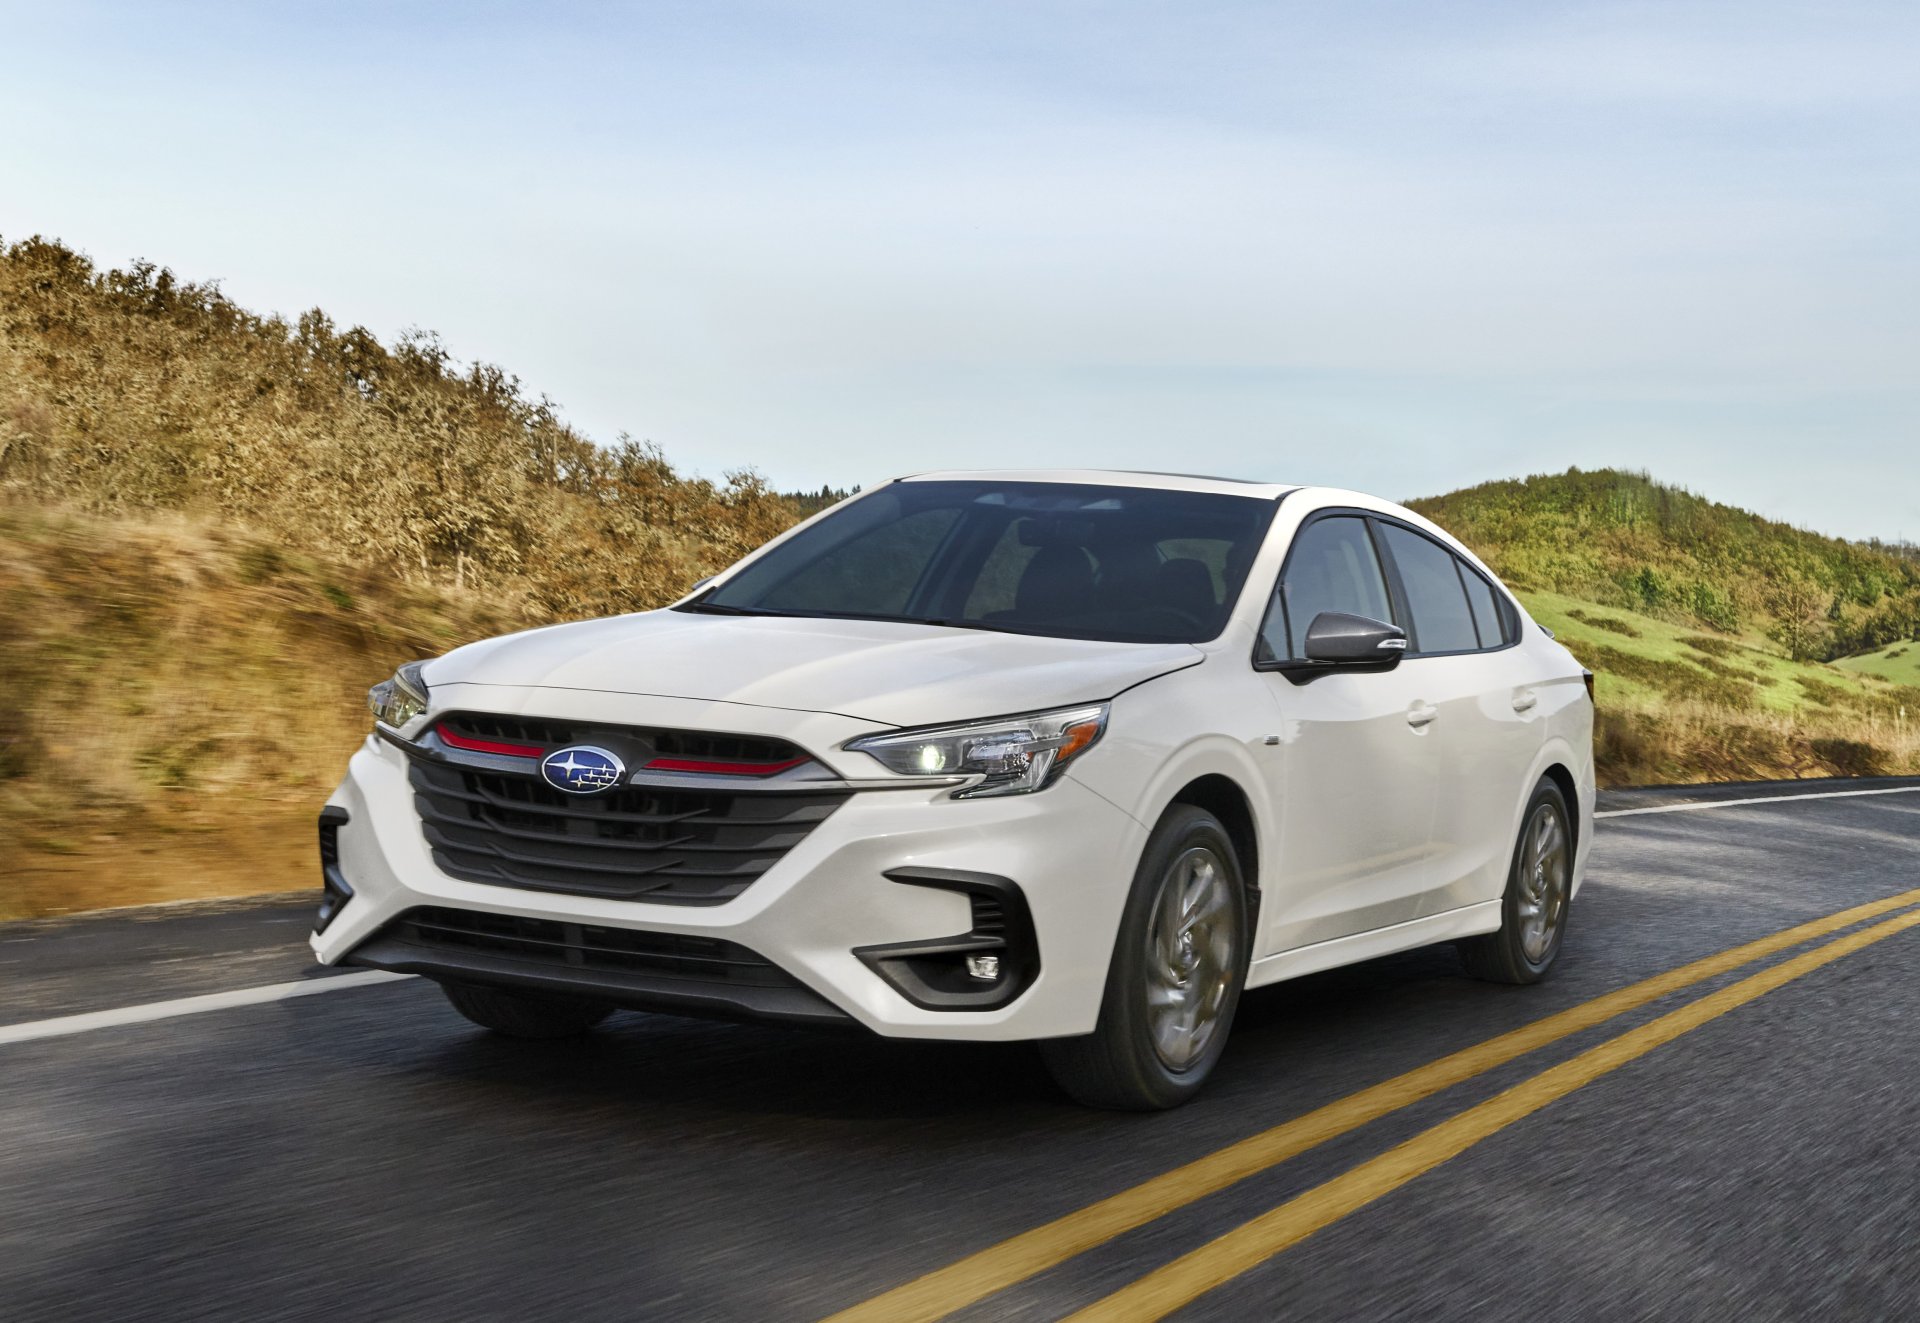 2023 Subaru Legacy Debuts With Refreshed Styling and Updated Safety